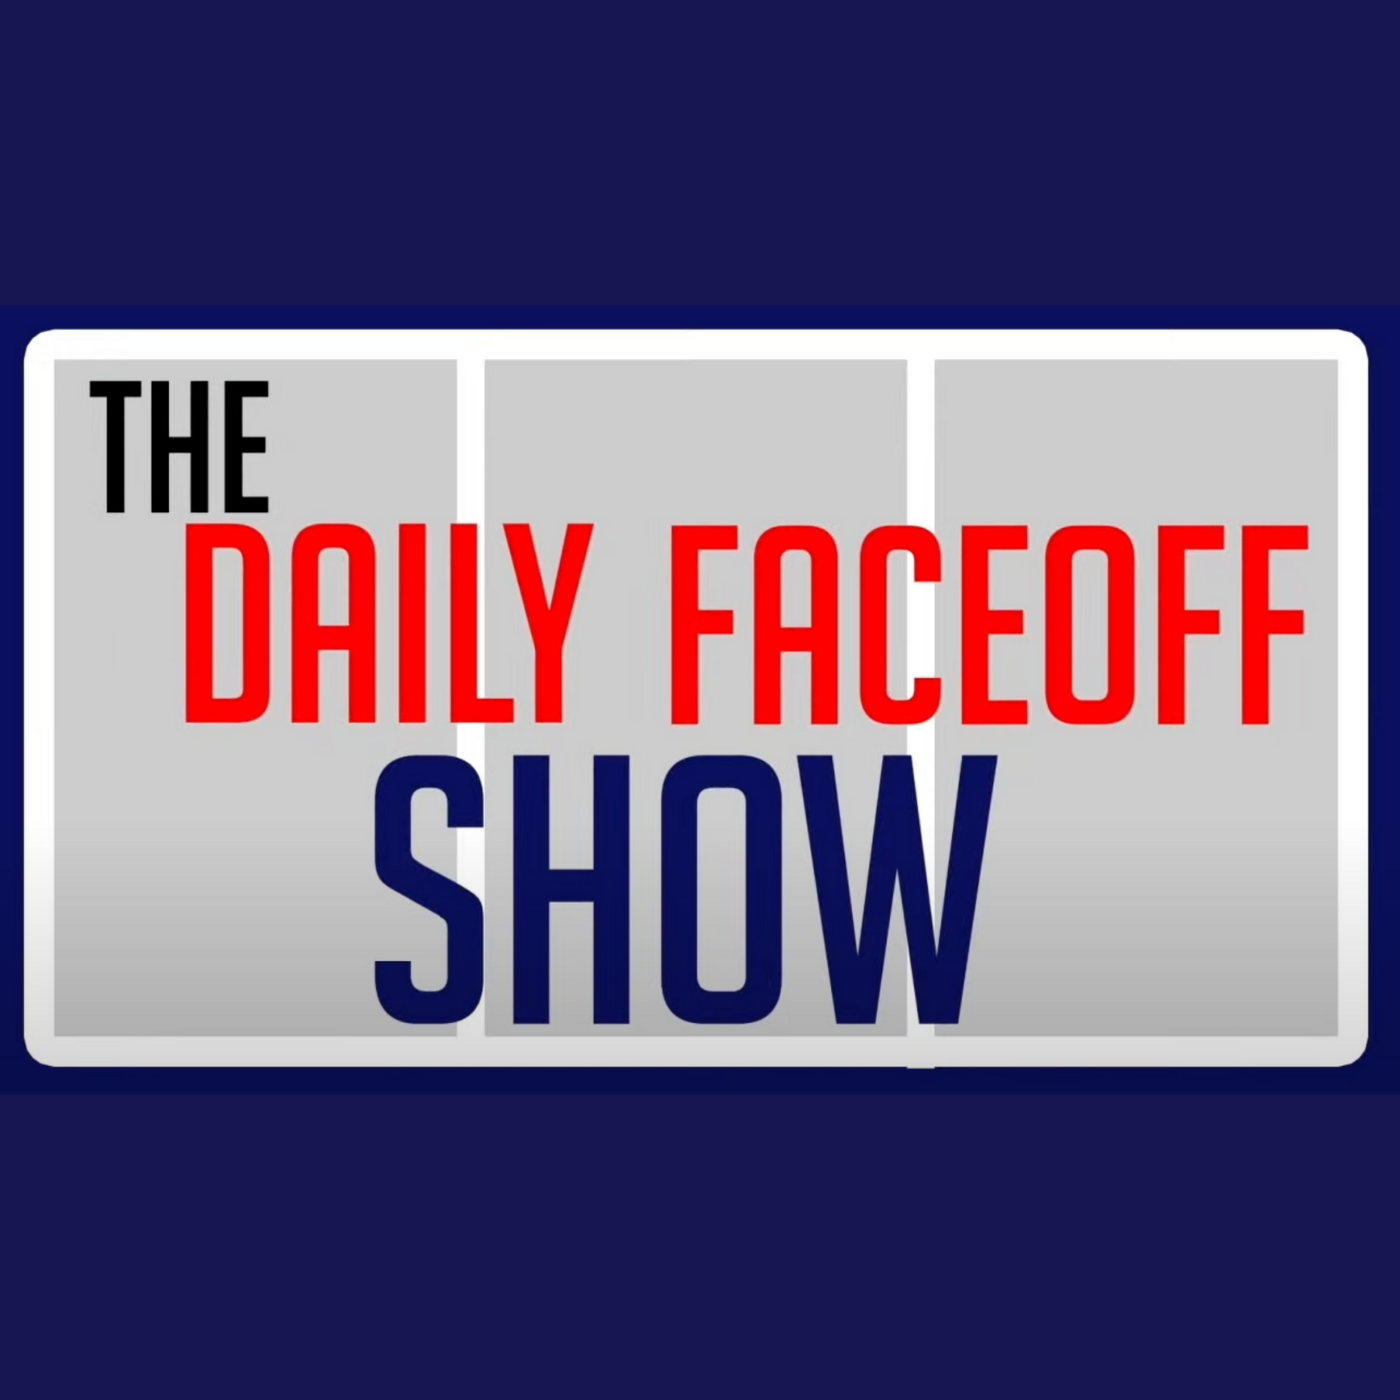 June 21st - The Daily Faceoff Show - Feat. Frank Seravalli & Mike McKenna